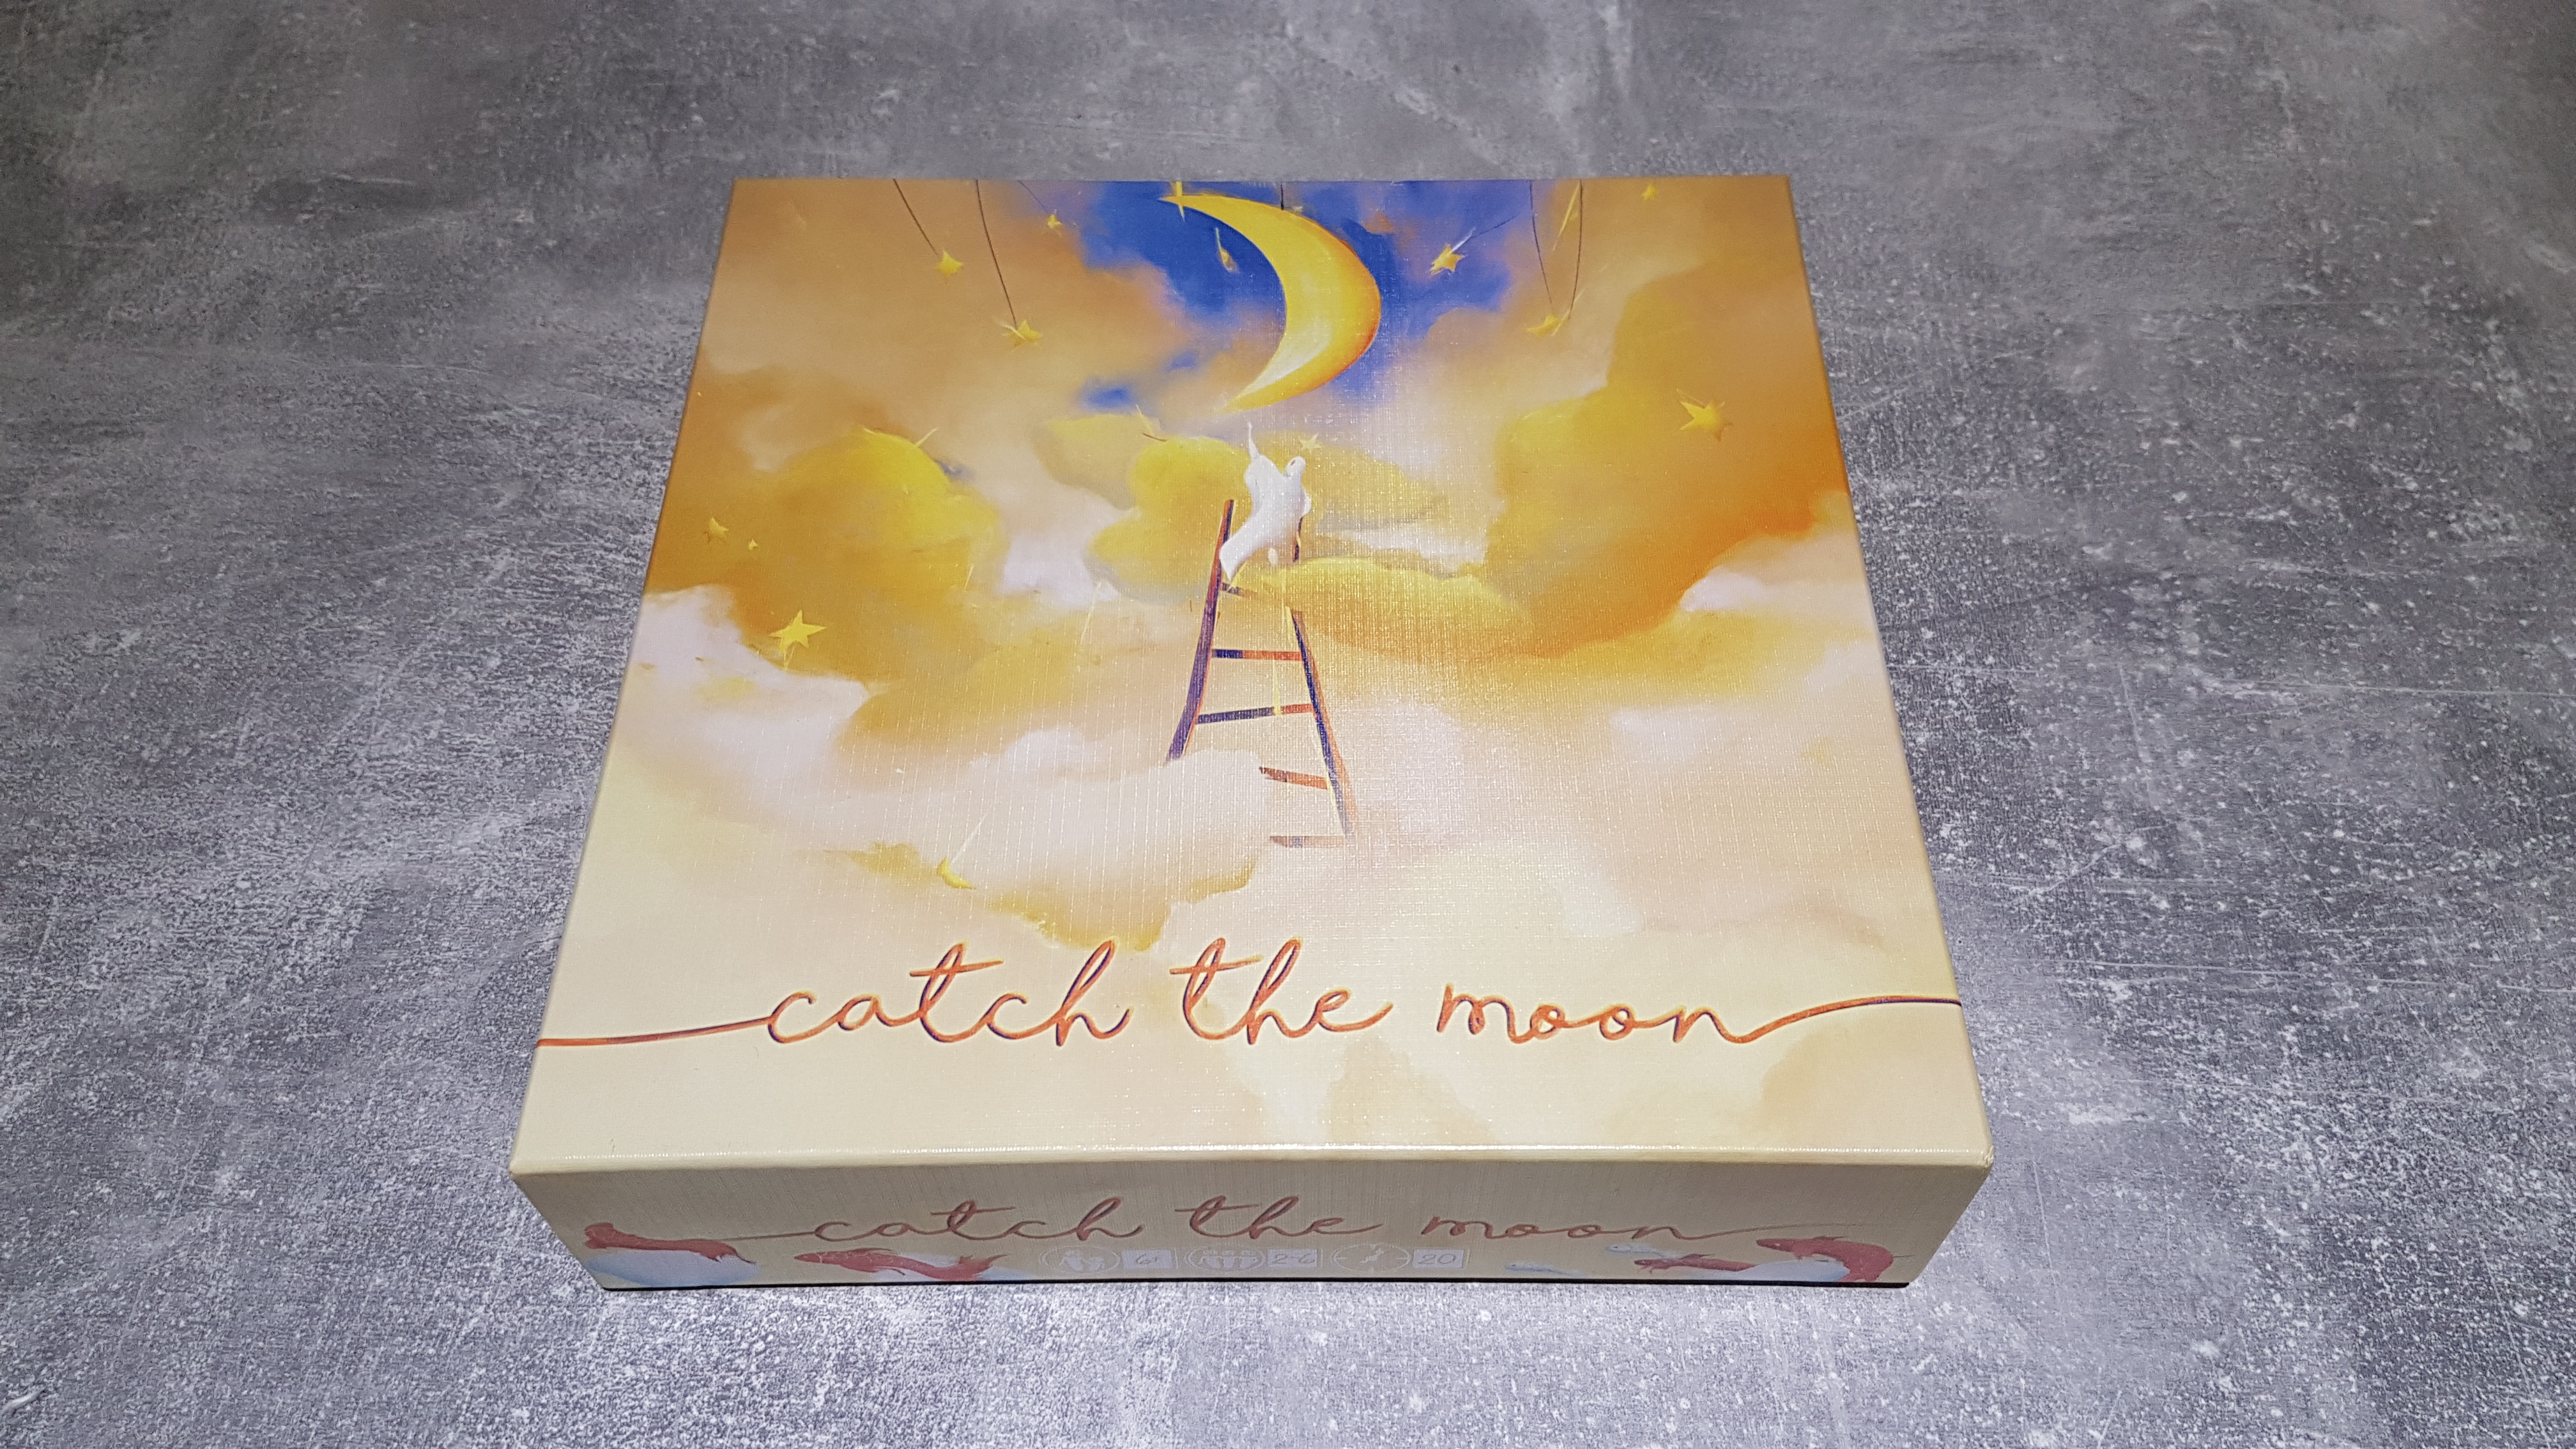 Catch The Moon Review – Ladders But No Snakes